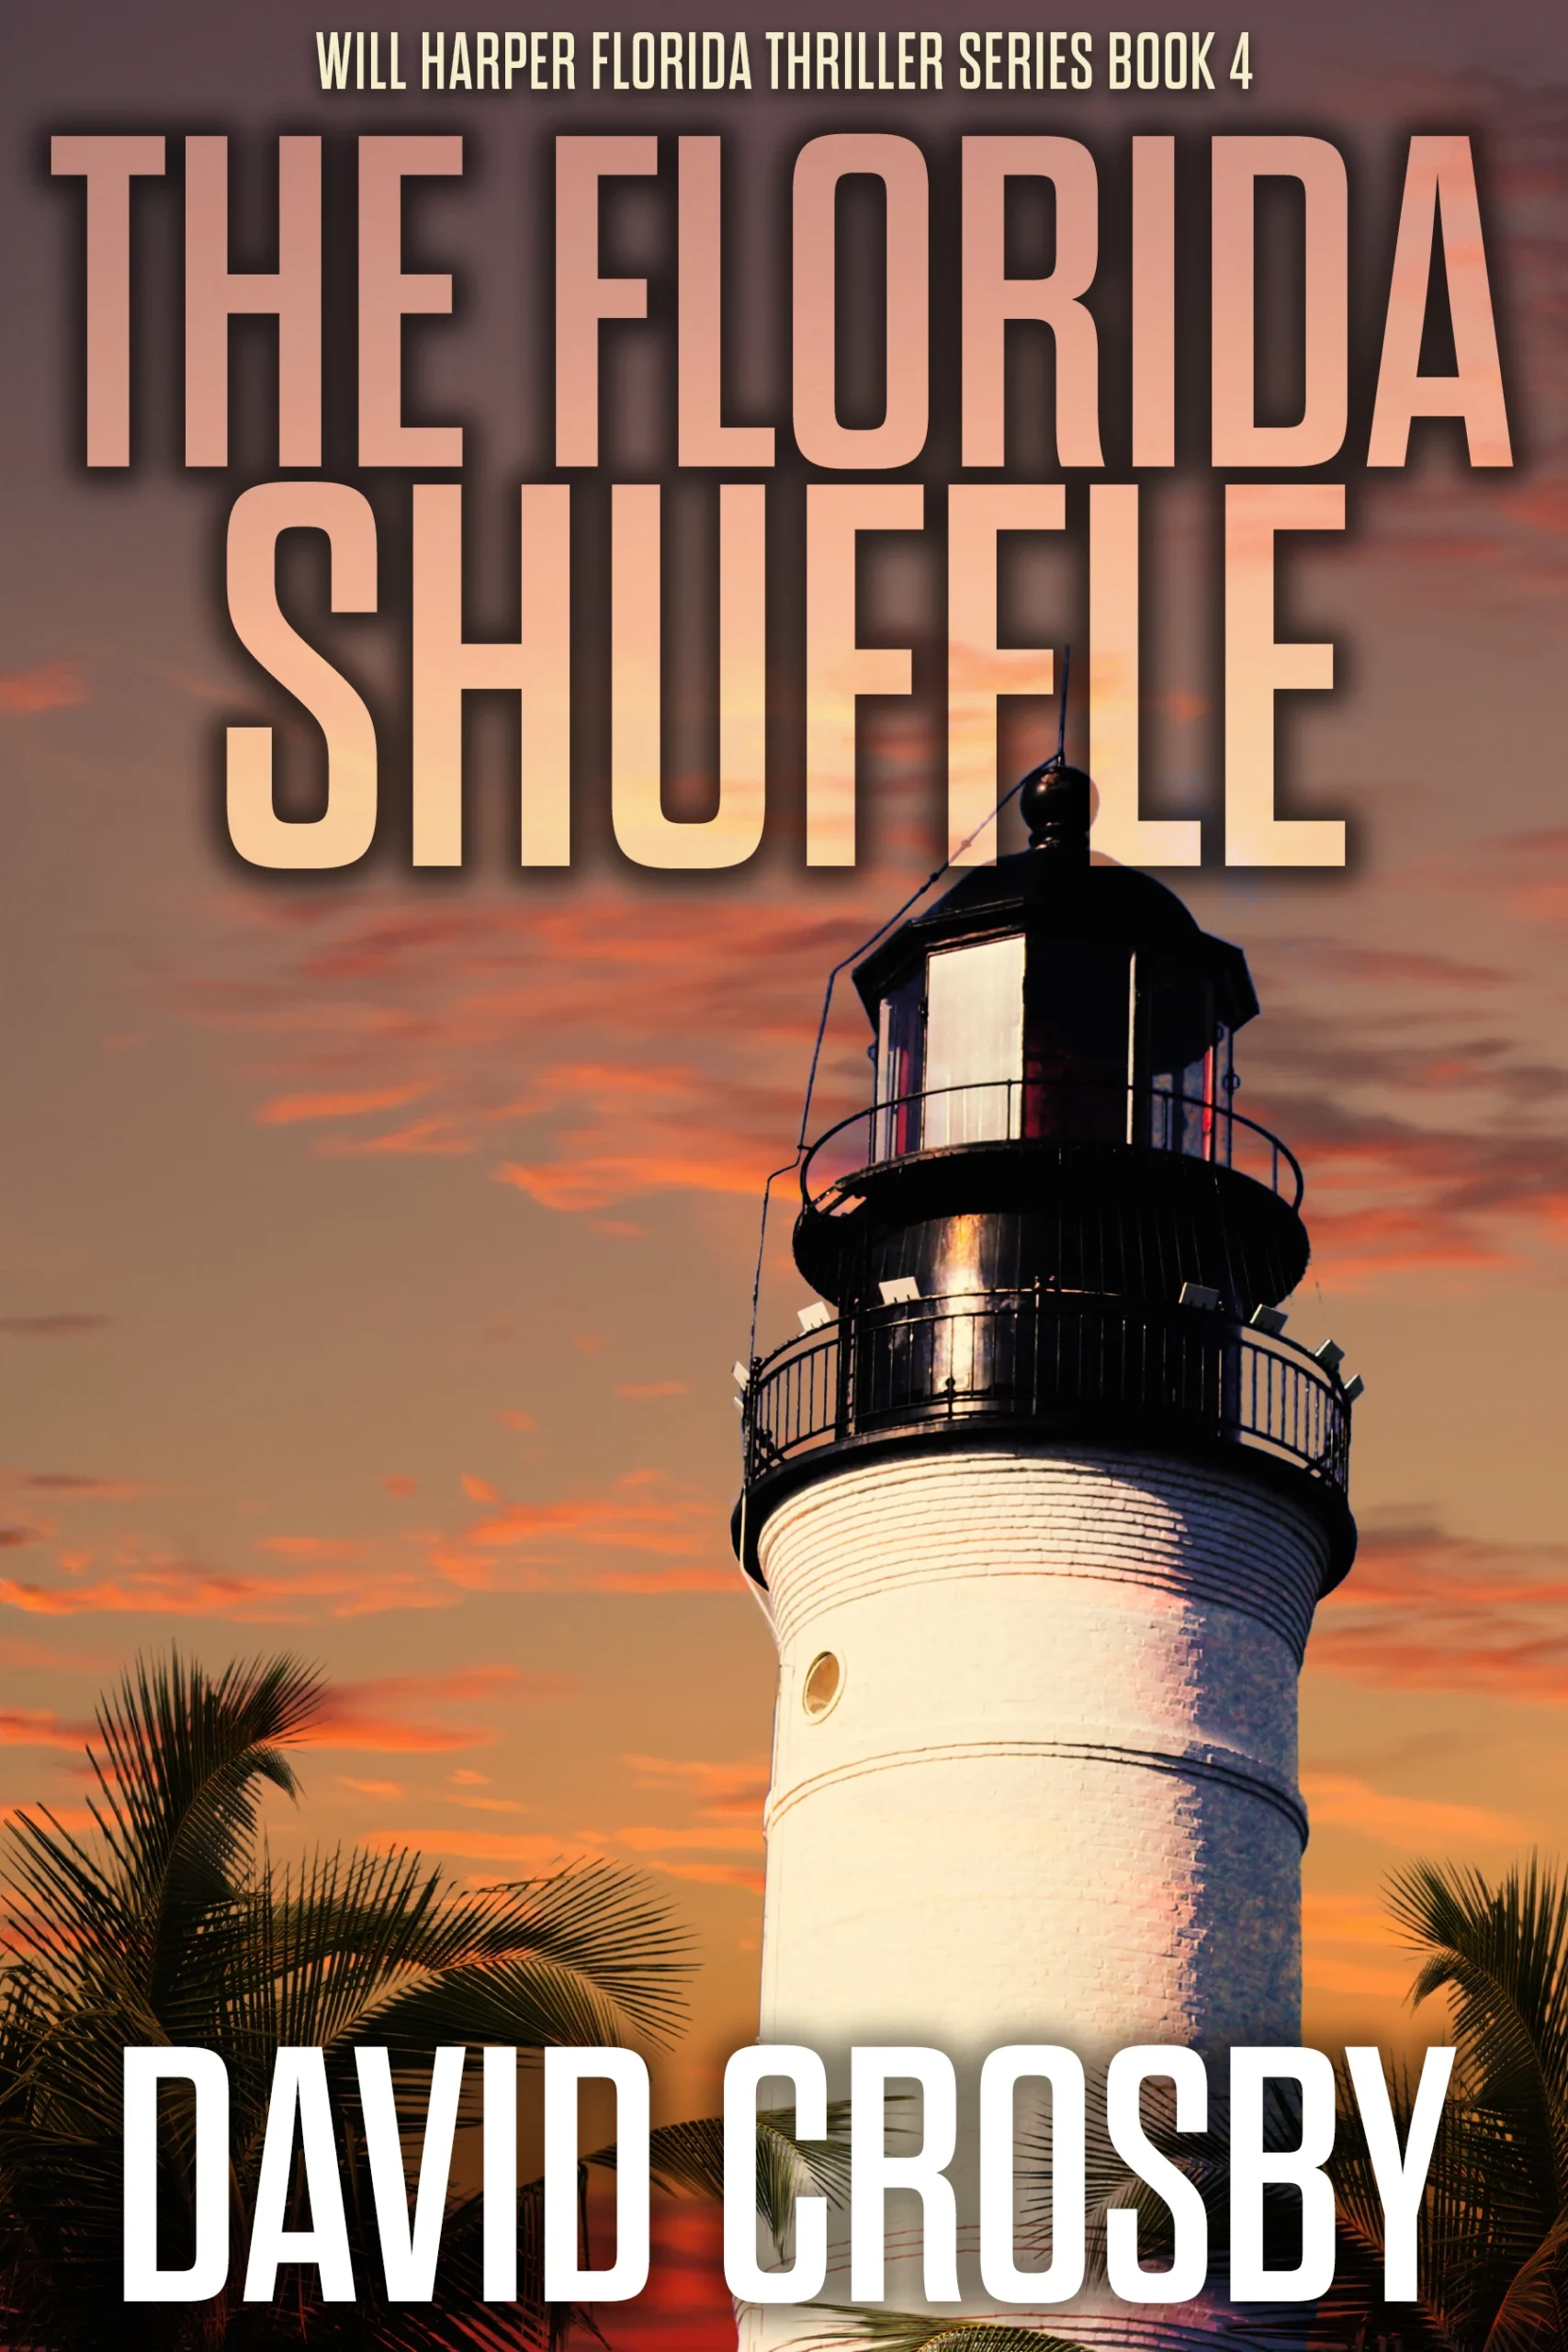 The Florida Shuffle: A Florida Thriller (Will Harper Mystery Series Book 4)